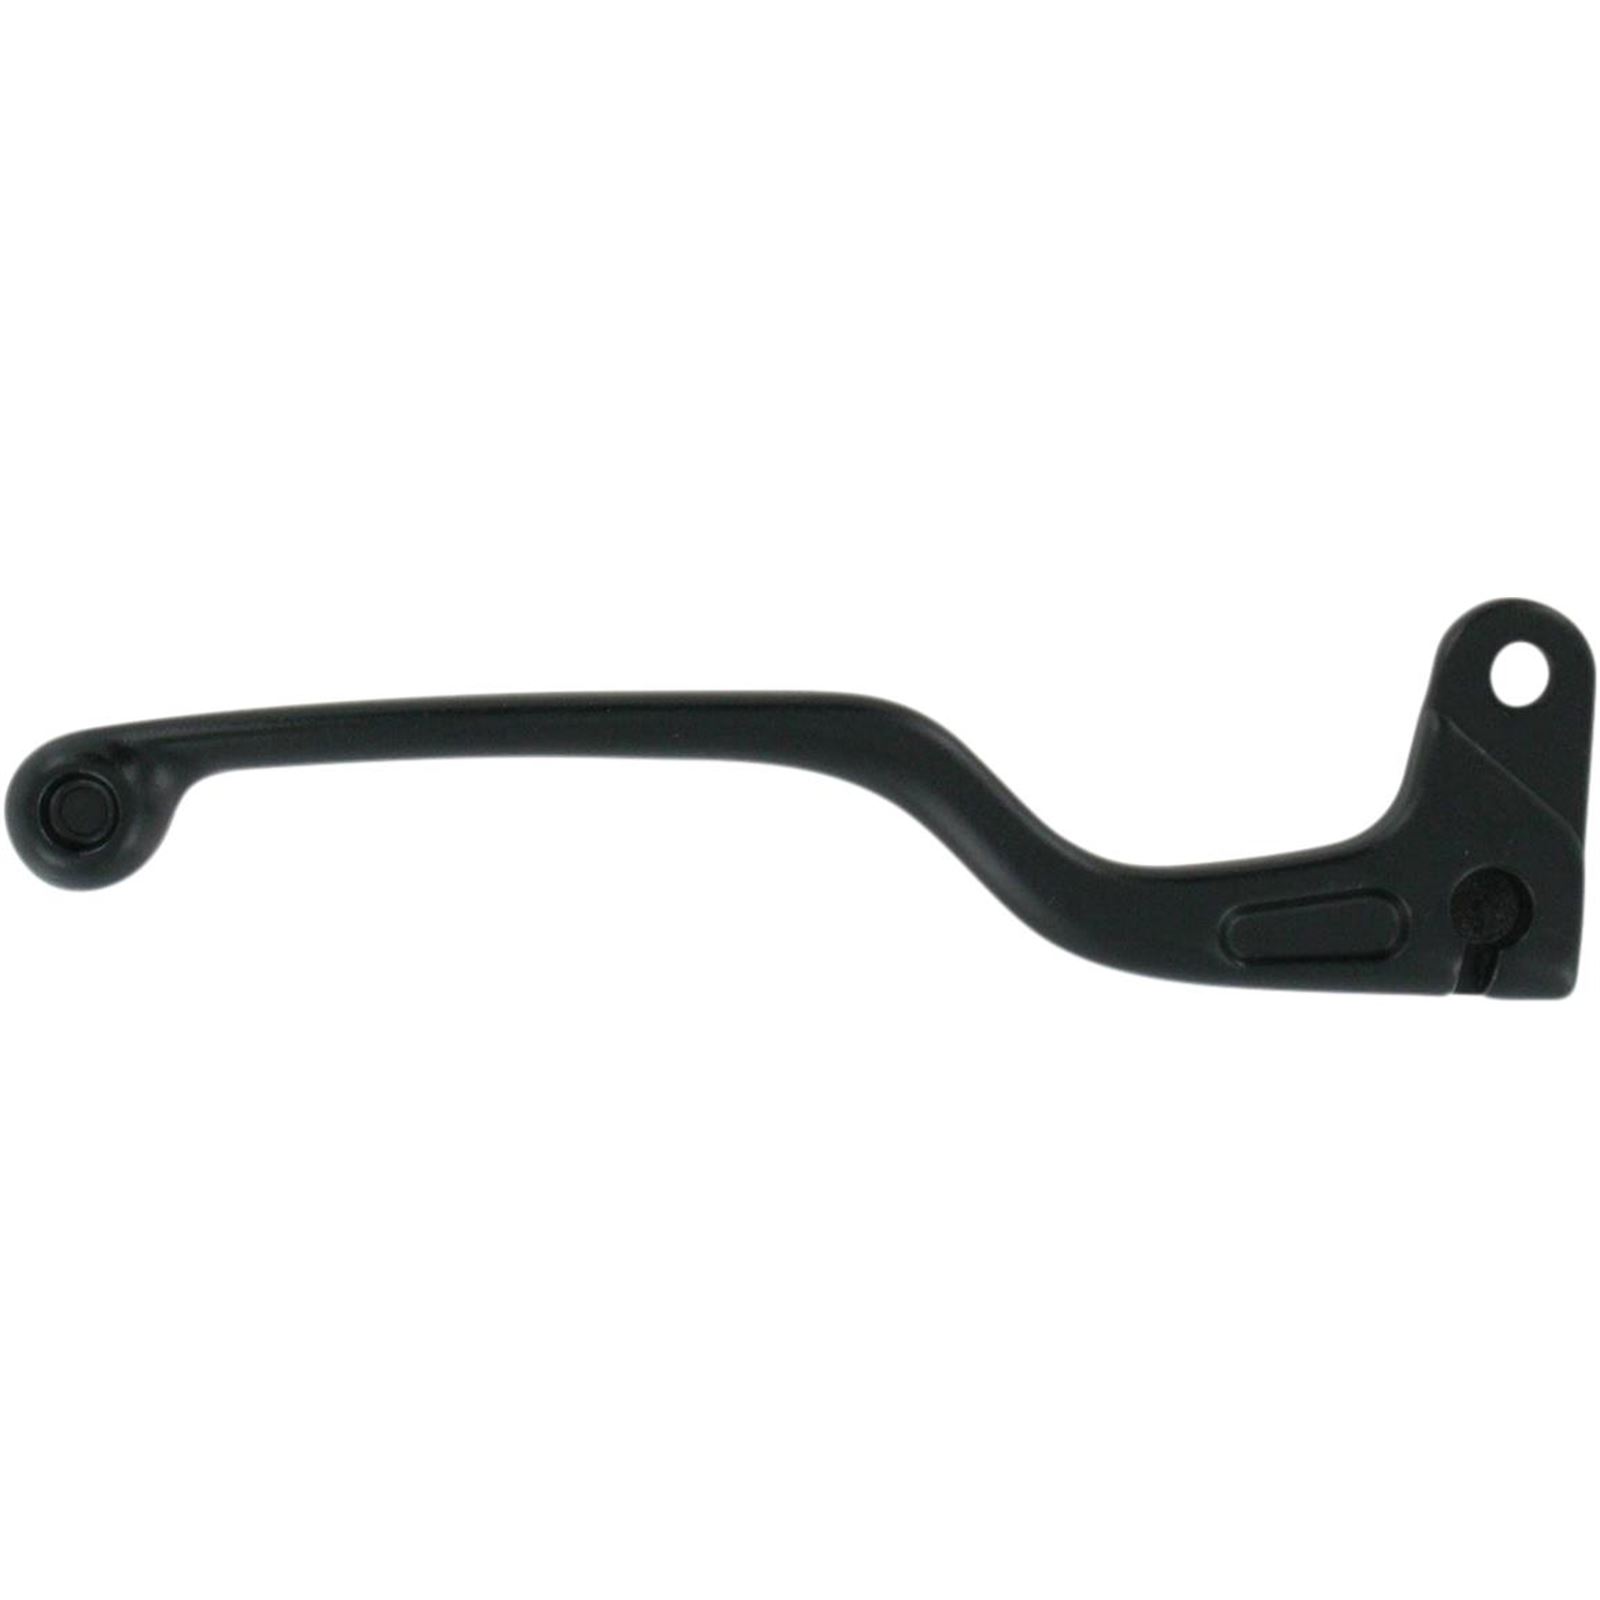 Parts Unlimited Lever - Left-Hand for Honda